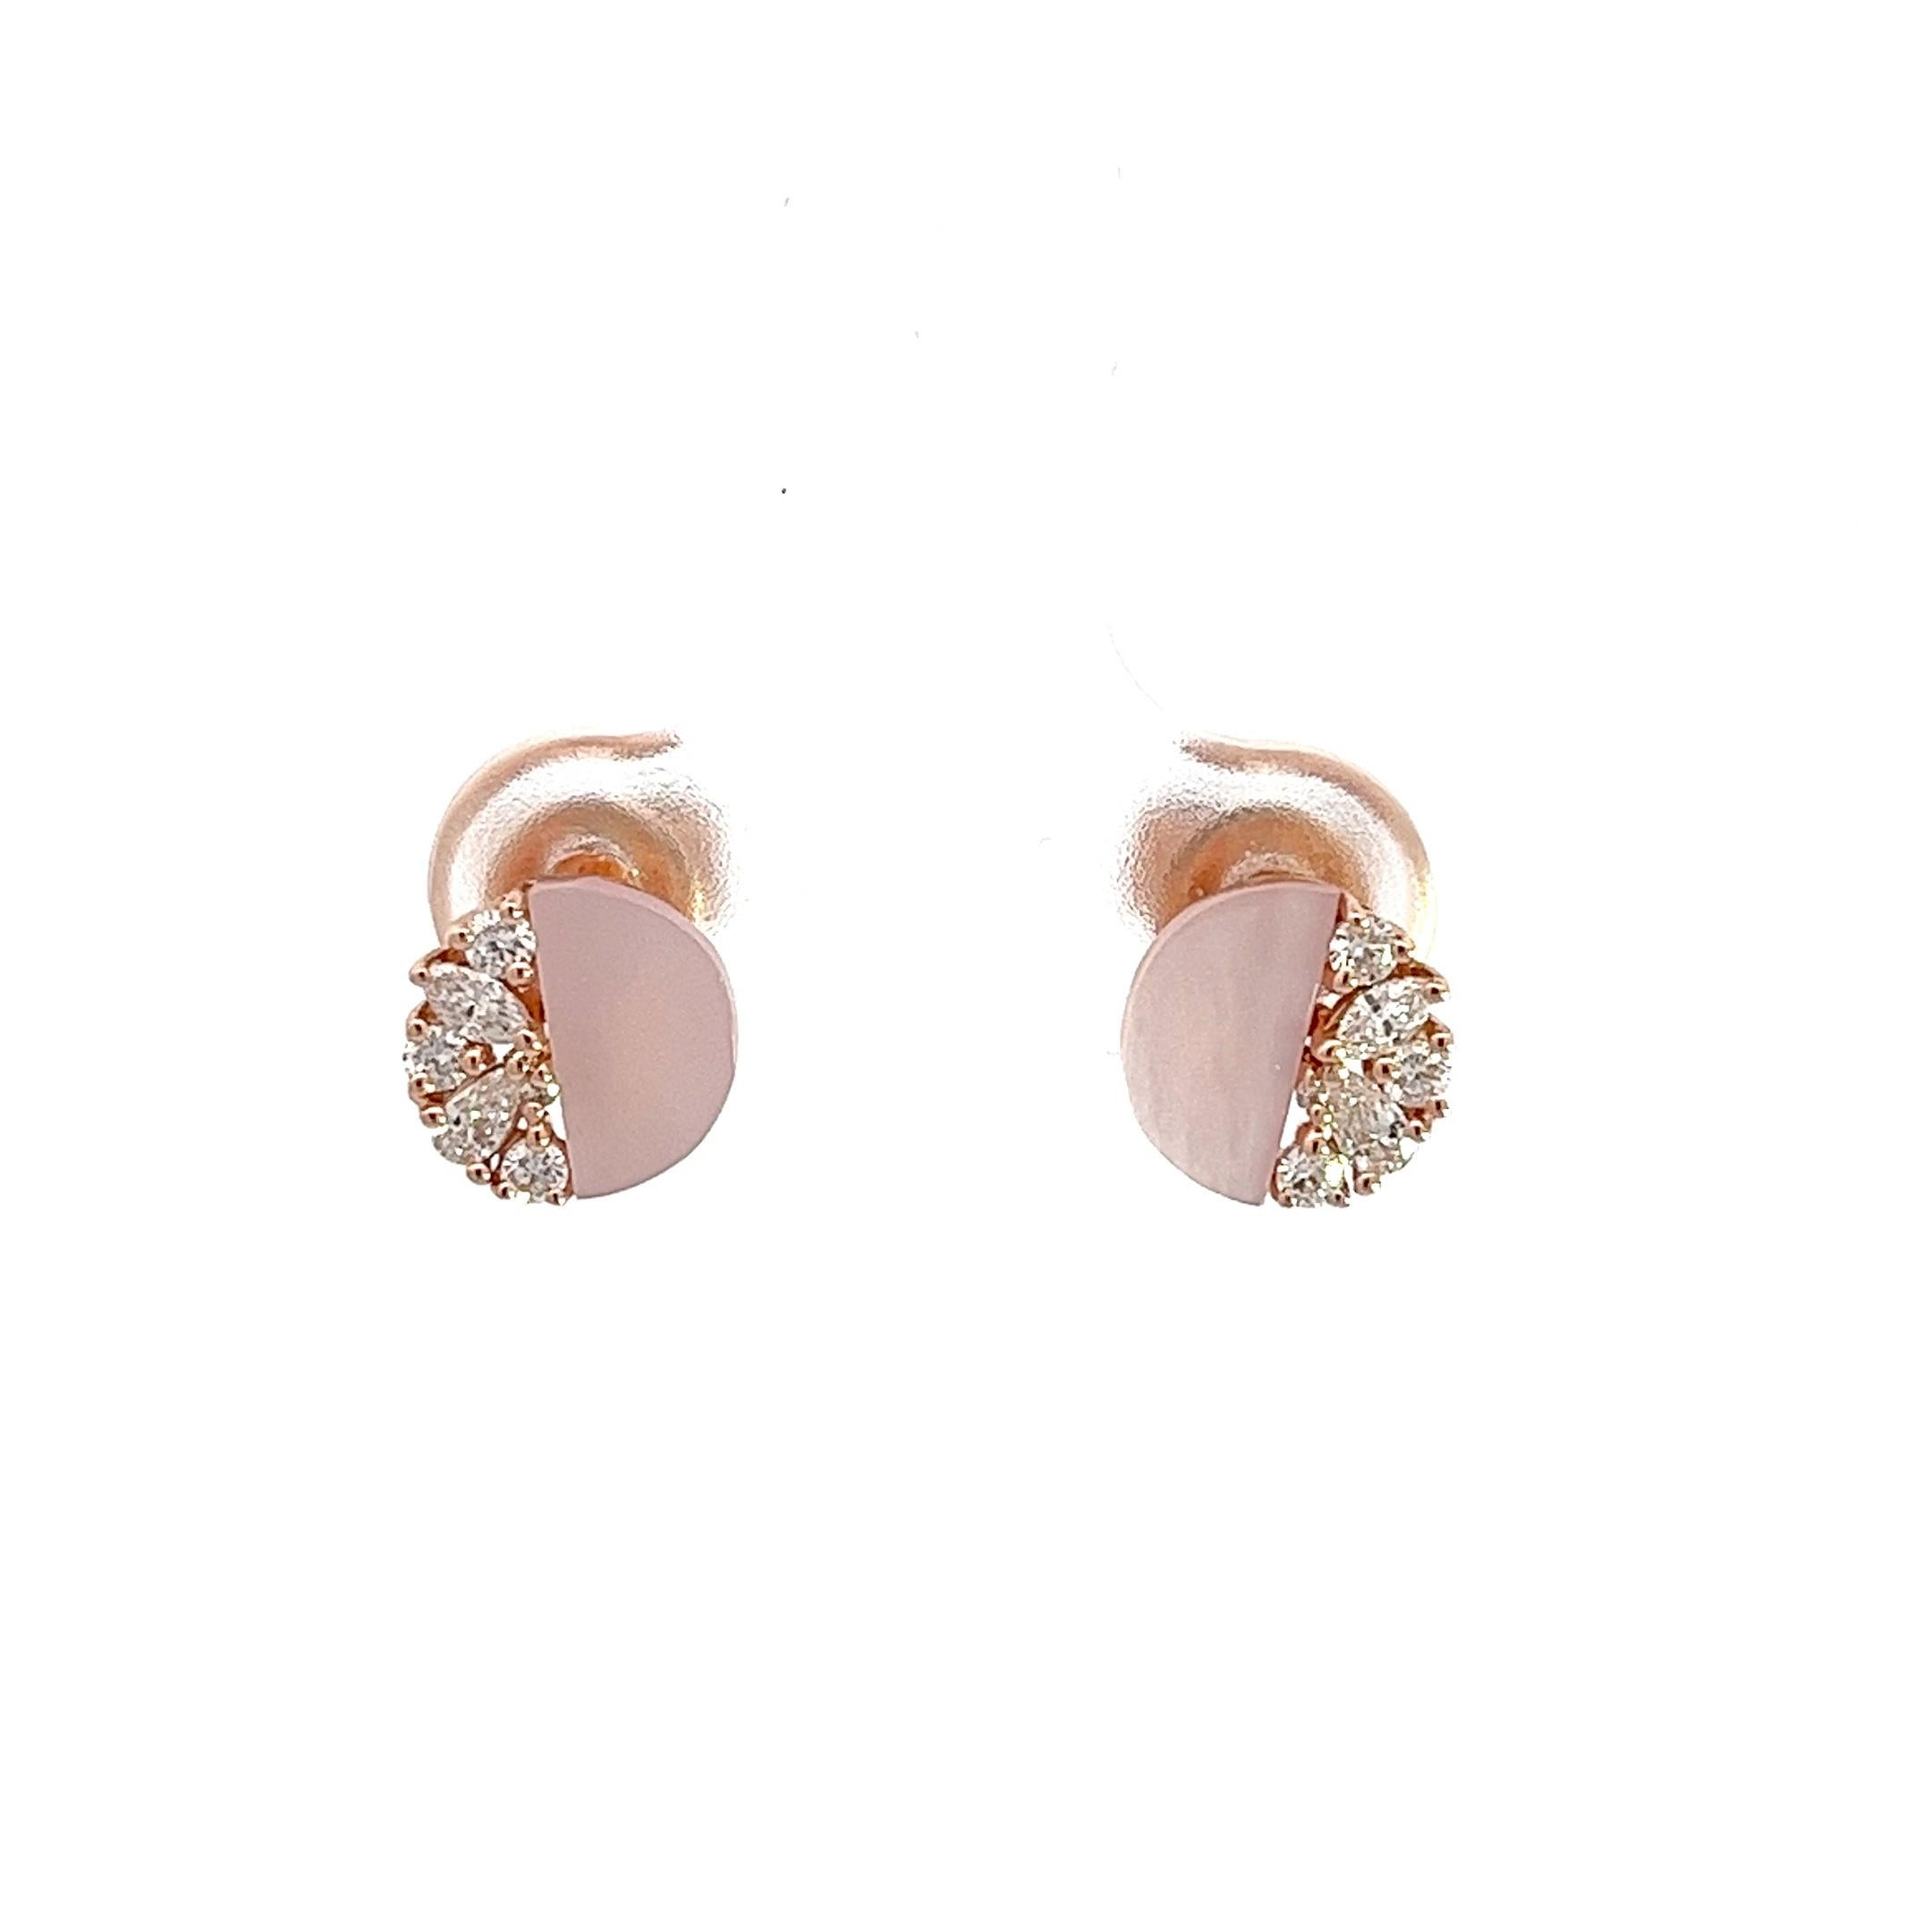 14K Rose Gold Earrings (Matching Necklace and Ring Available)

Diamond 8- 0.121cts

MQ 2 - 0.062cts

PR 2 - 0.069cts

Mother of pearl 2 - 1.075cts 
Weight 1.885g


With a heritage of ancient fine Swiss jewelry traditions, NATKINA is a Geneva based